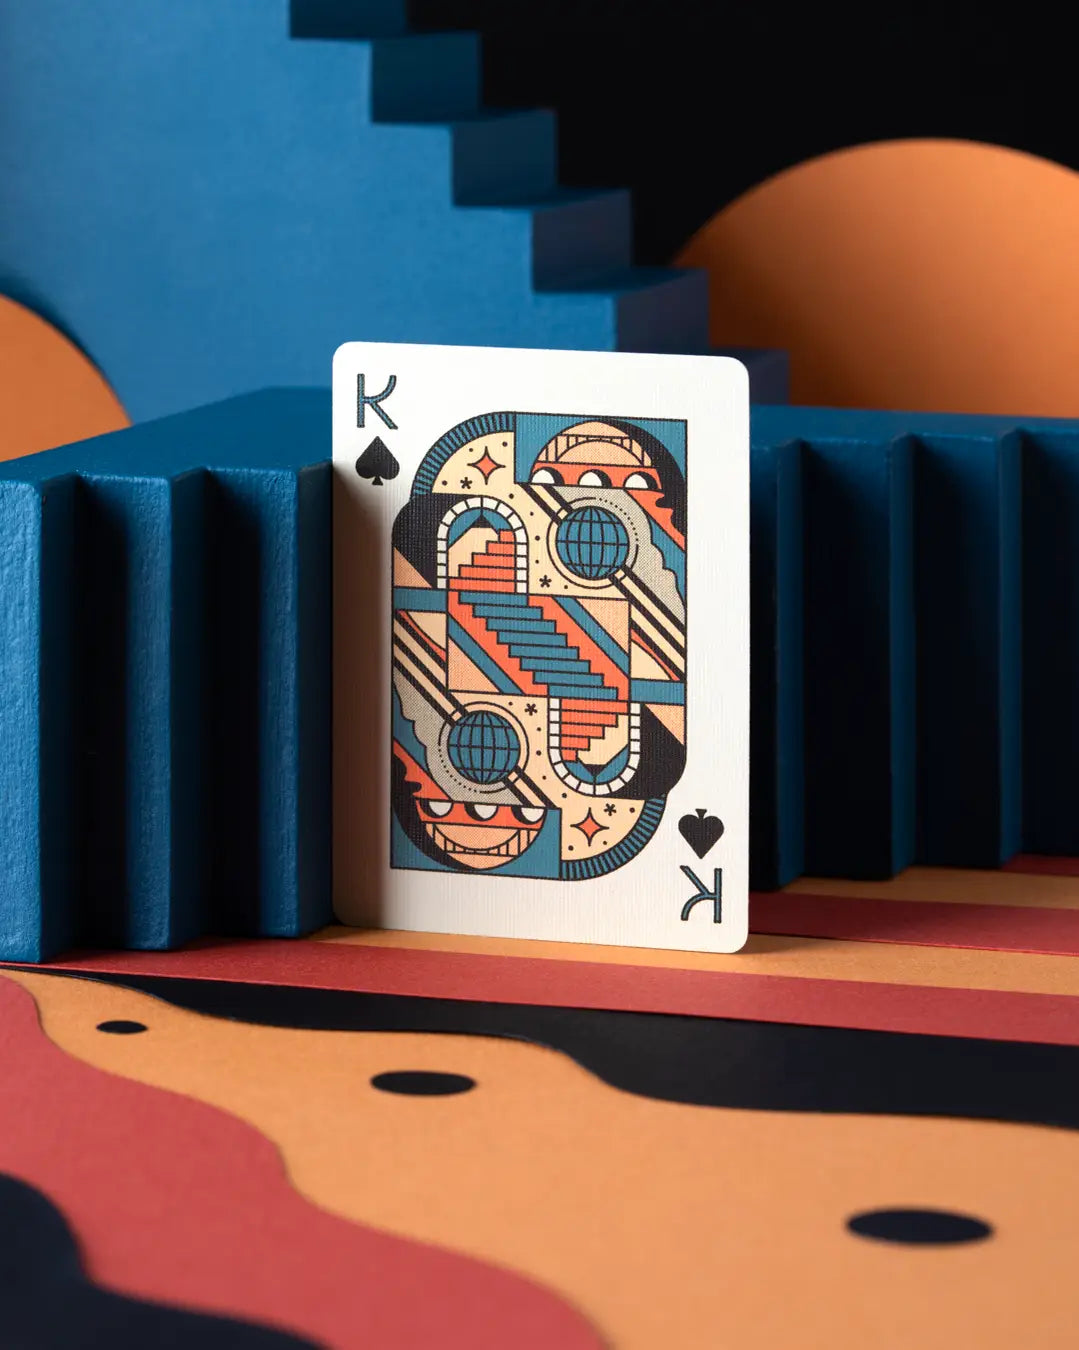 Mindfulness Playing Cards - Single Deck